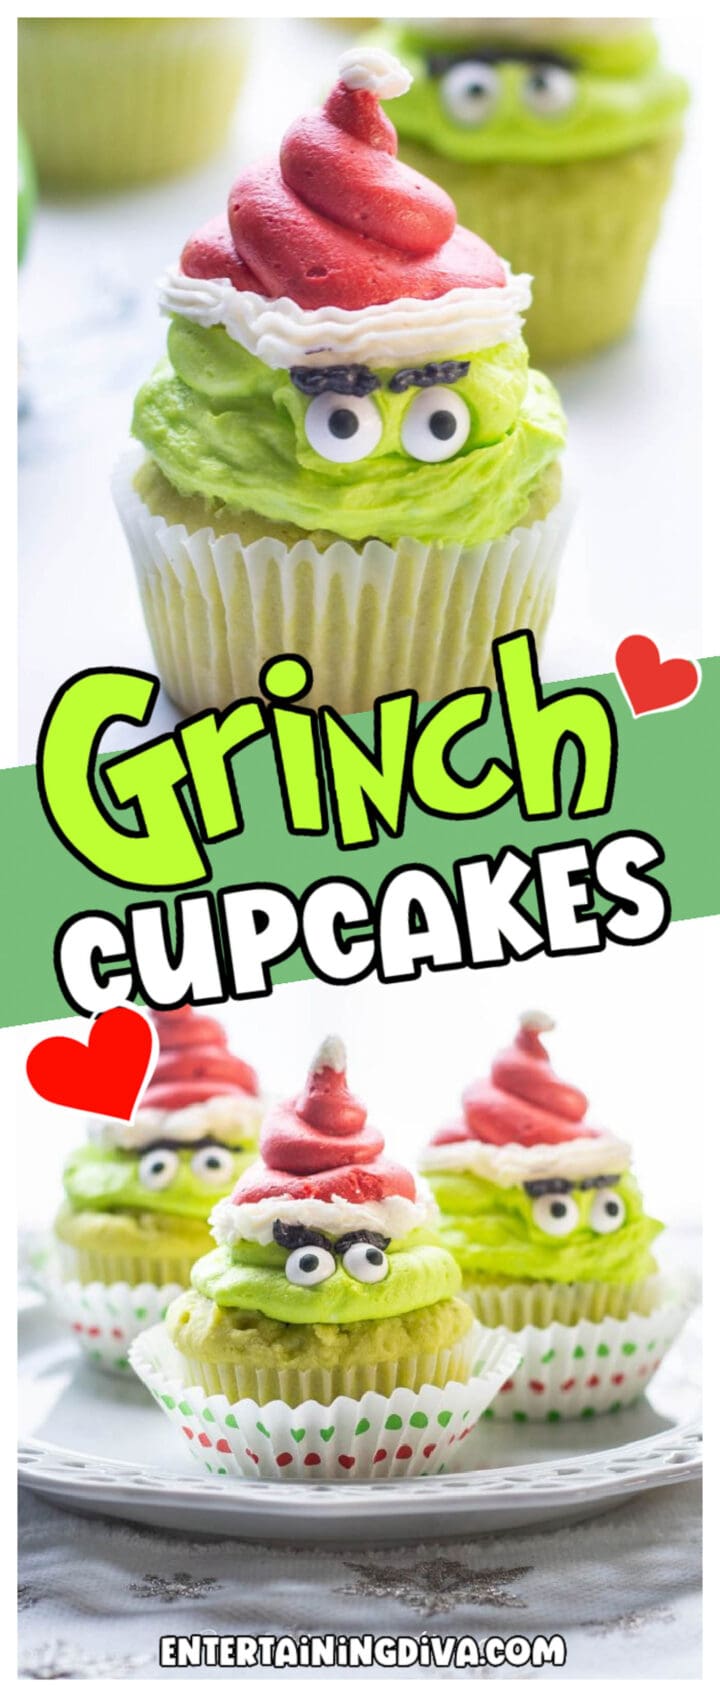 Grinch cupcakes on a plate with heart-filled grinch cupcakes.